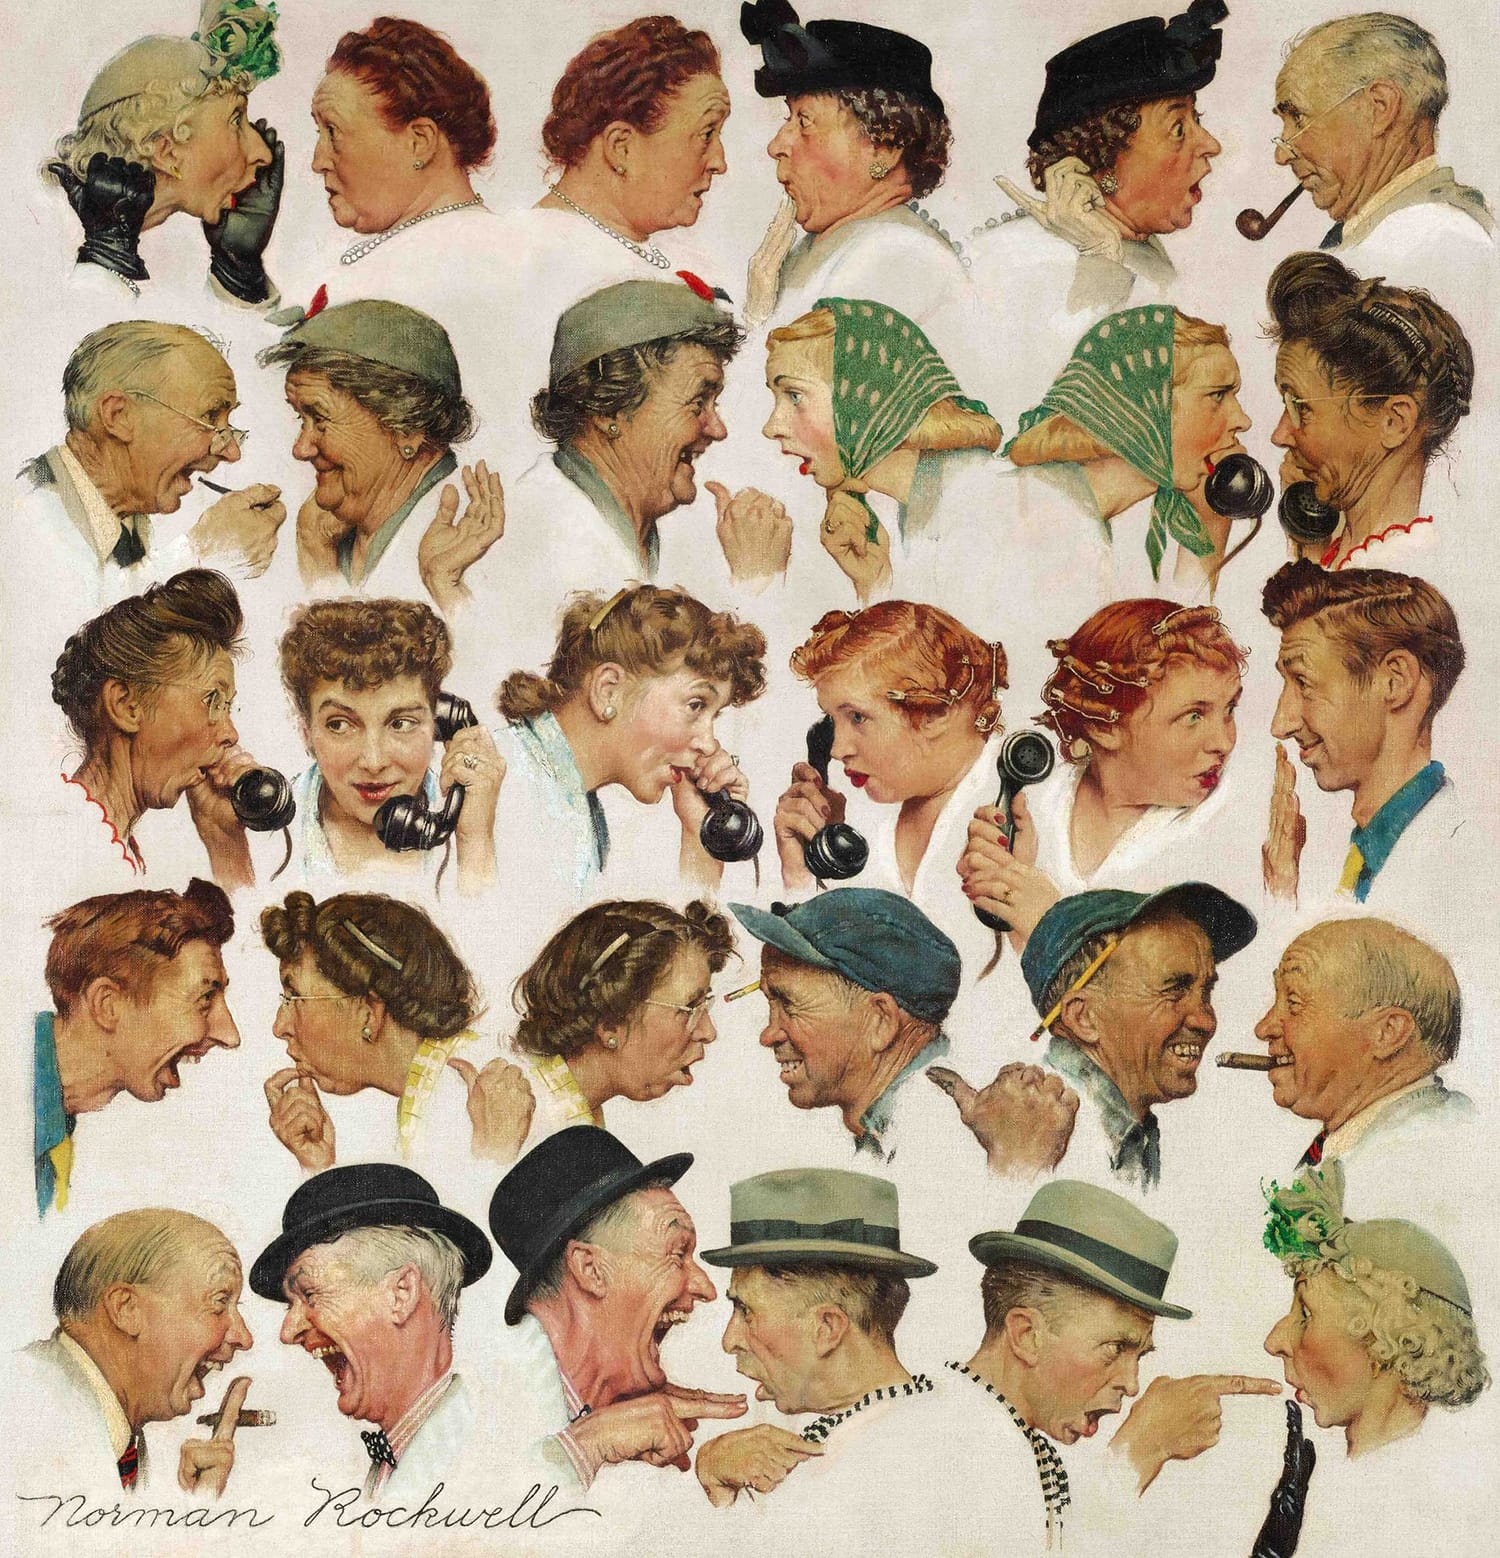 Norman Rockwell’s The Gossips